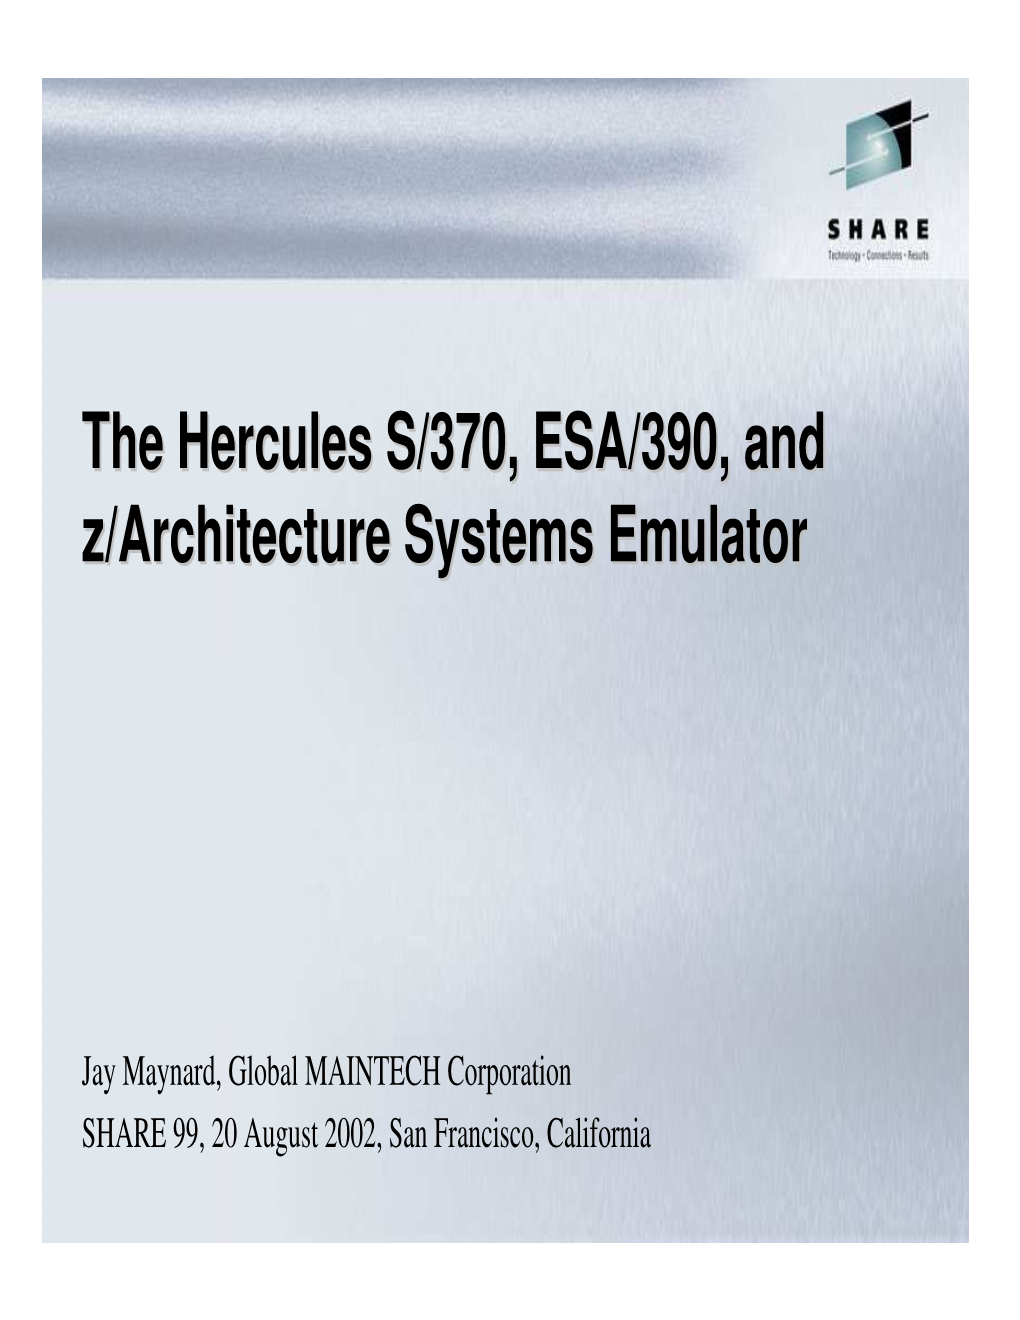 The Hercules S/370, ESA/390, and Z/Architecture Systems Emulator